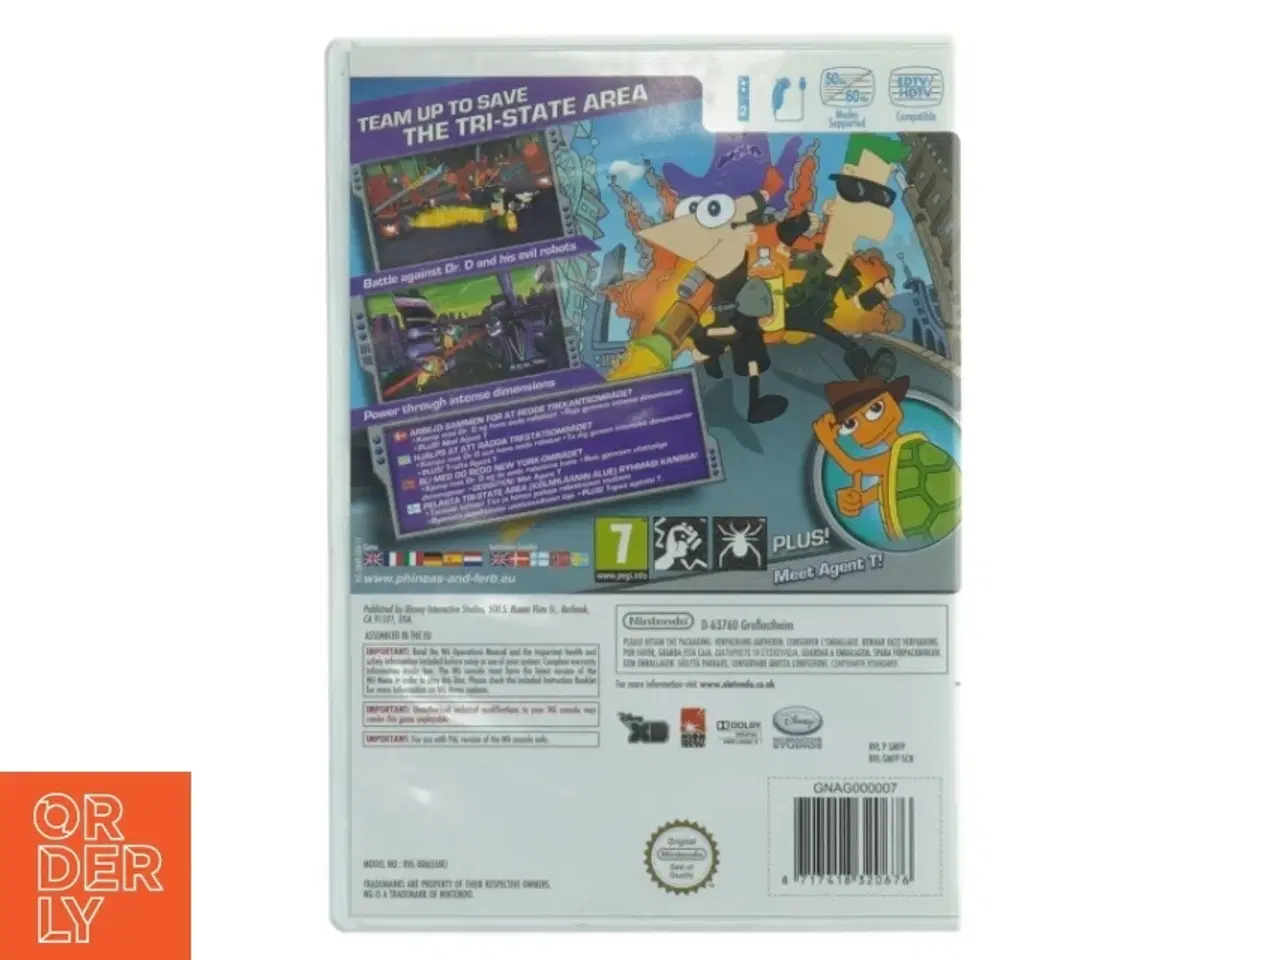 Billede 4 - Phineas and Ferb: Across the 2nd Dimension Wii spil fra Wii (str. 19 x 13 cm)